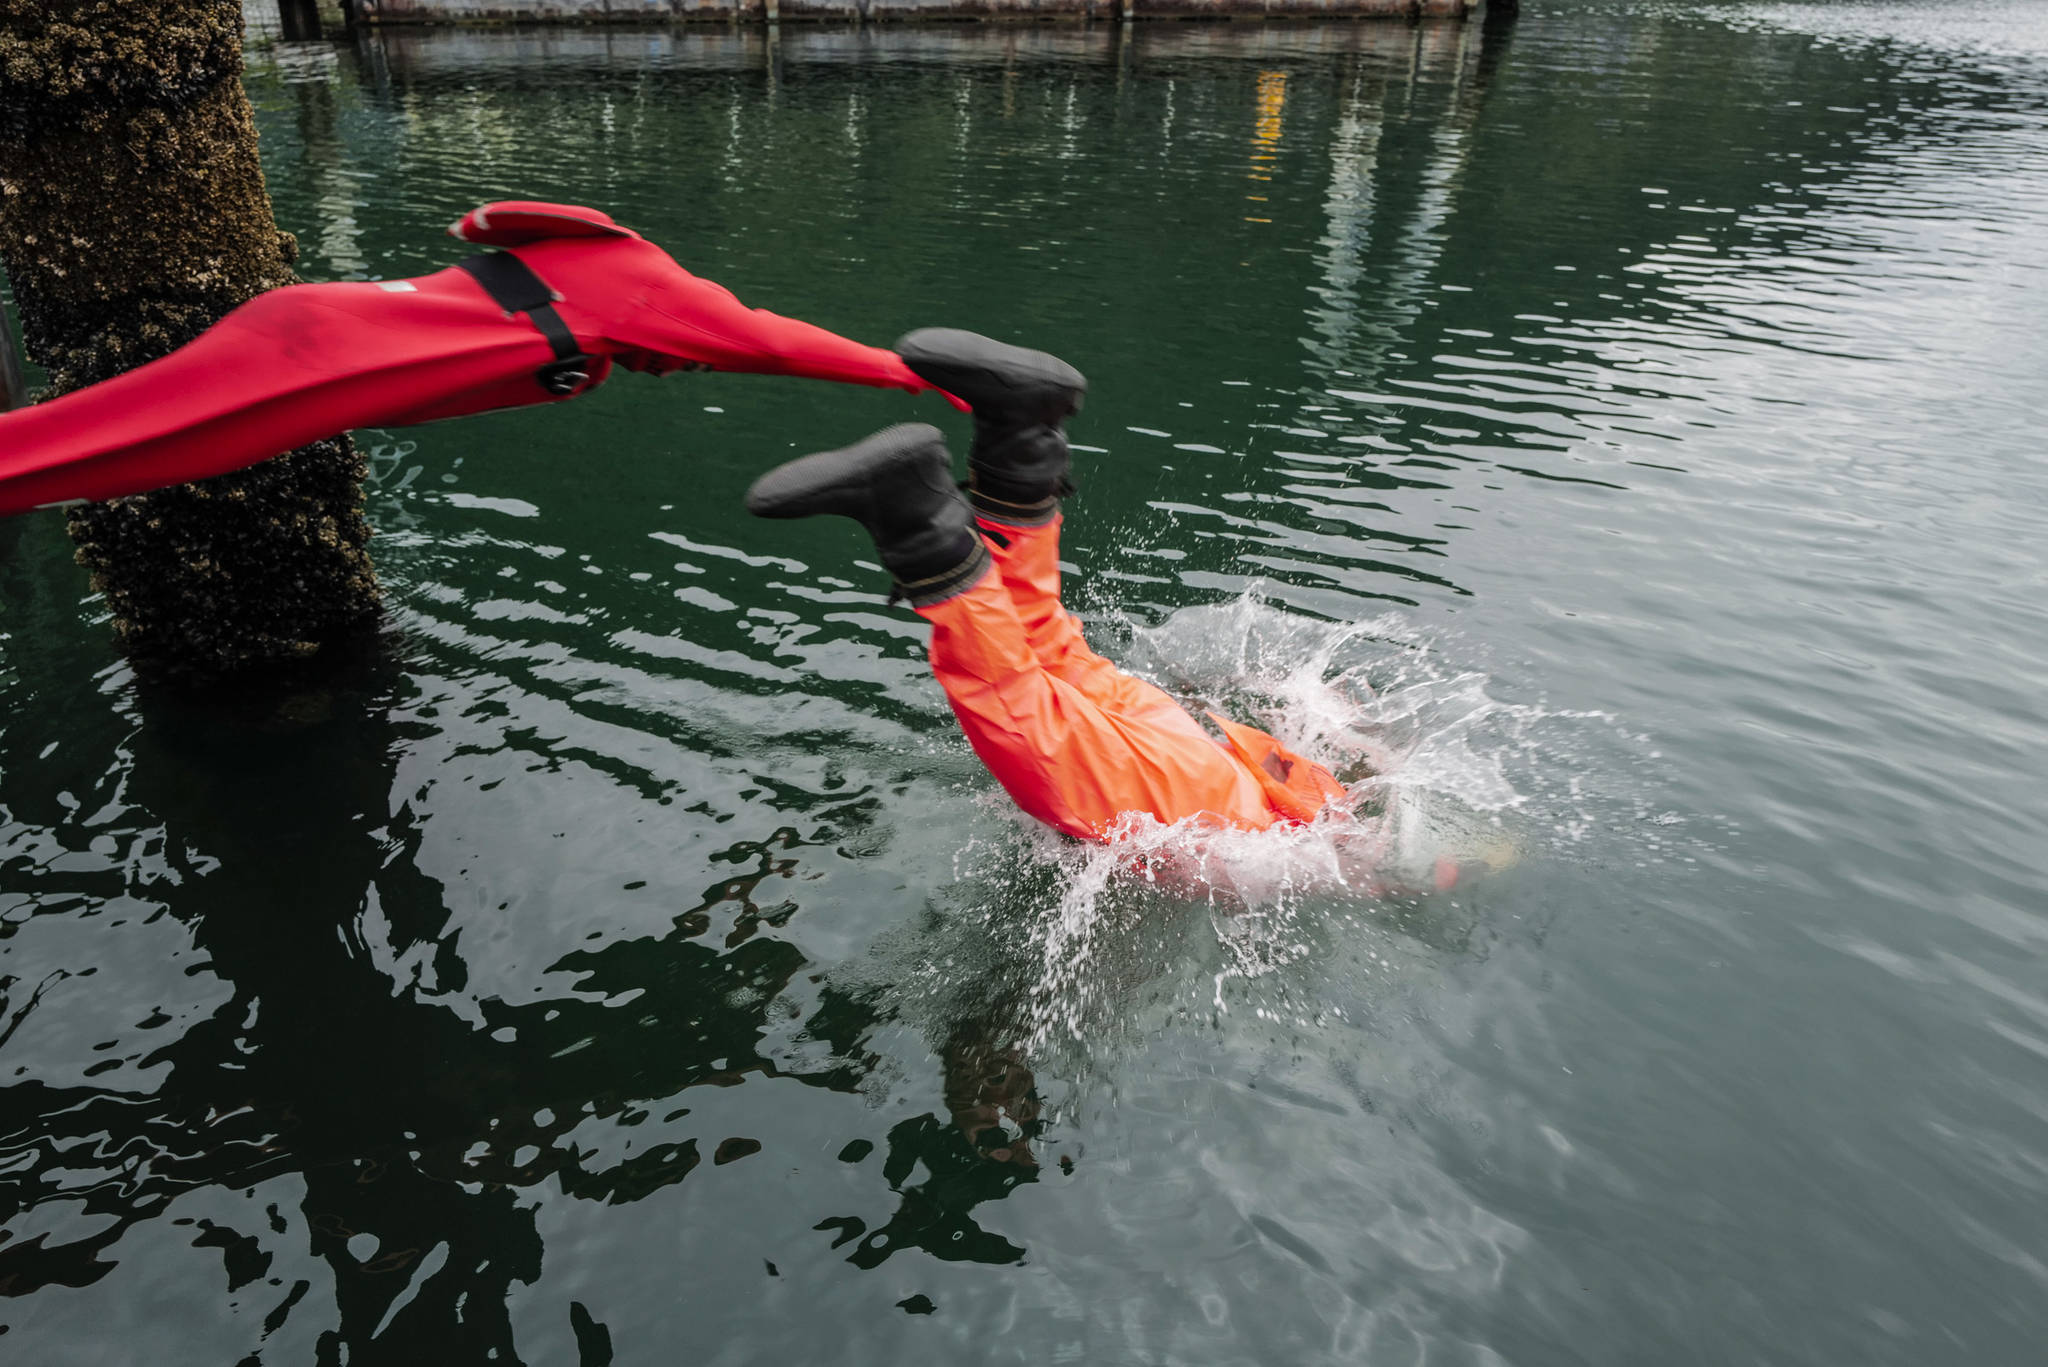 Members of the U.S. Coast Guard, U.S.C.G Dive Team, U.S. Army Dive Team and the Canadian Coast Guard participate in the annual Buoy Tender Olympics at Station Juneau on Wednesday, Aug. 21, 2019. (Michael Penn | Juneau Empire)